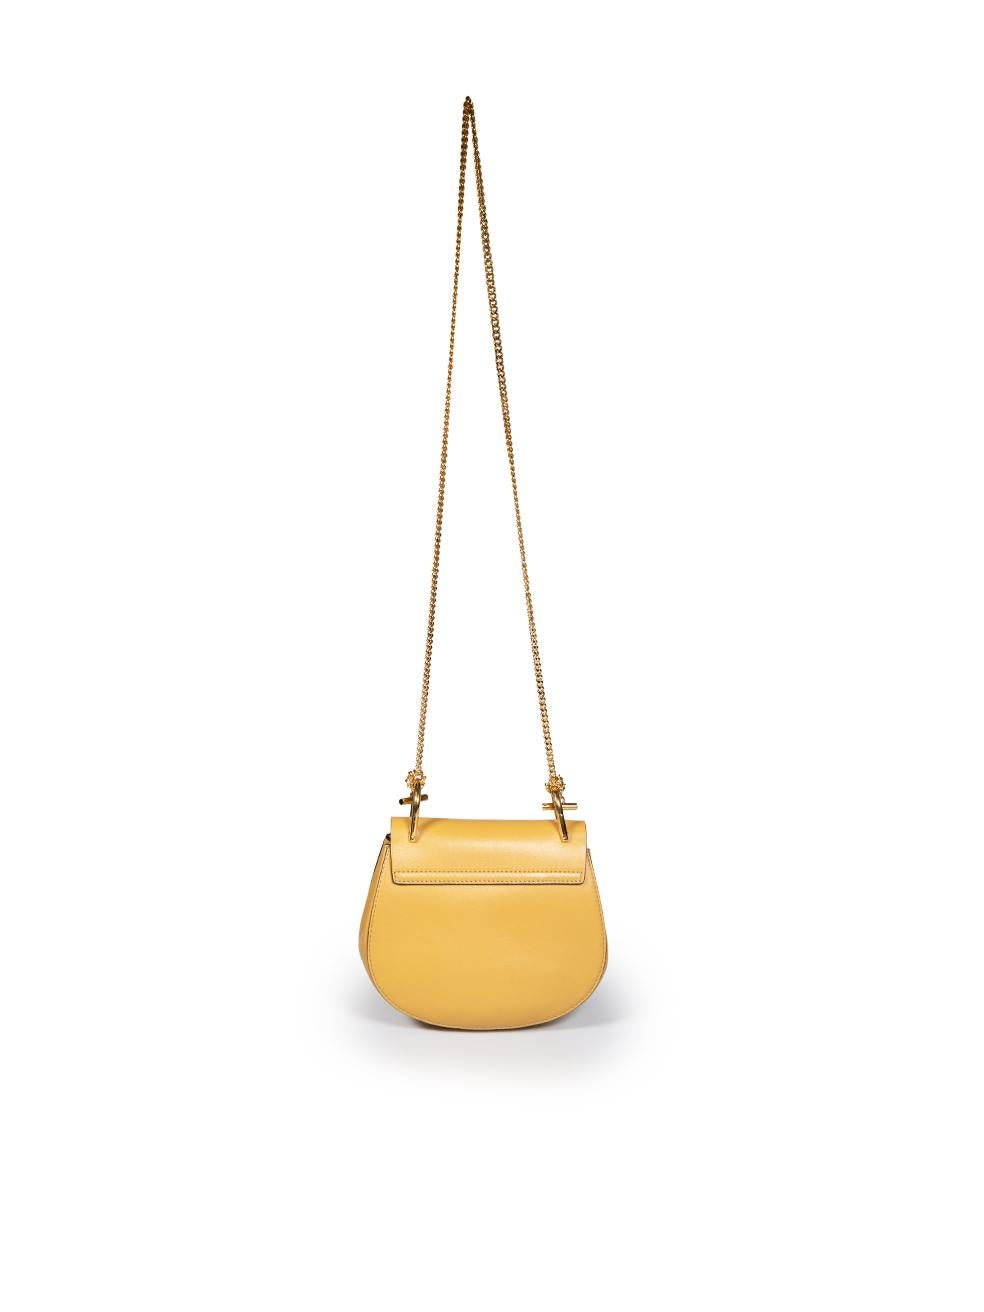 Chloé Yellow Suede Drew Crossbody Bag In Excellent Condition For Sale In London, GB